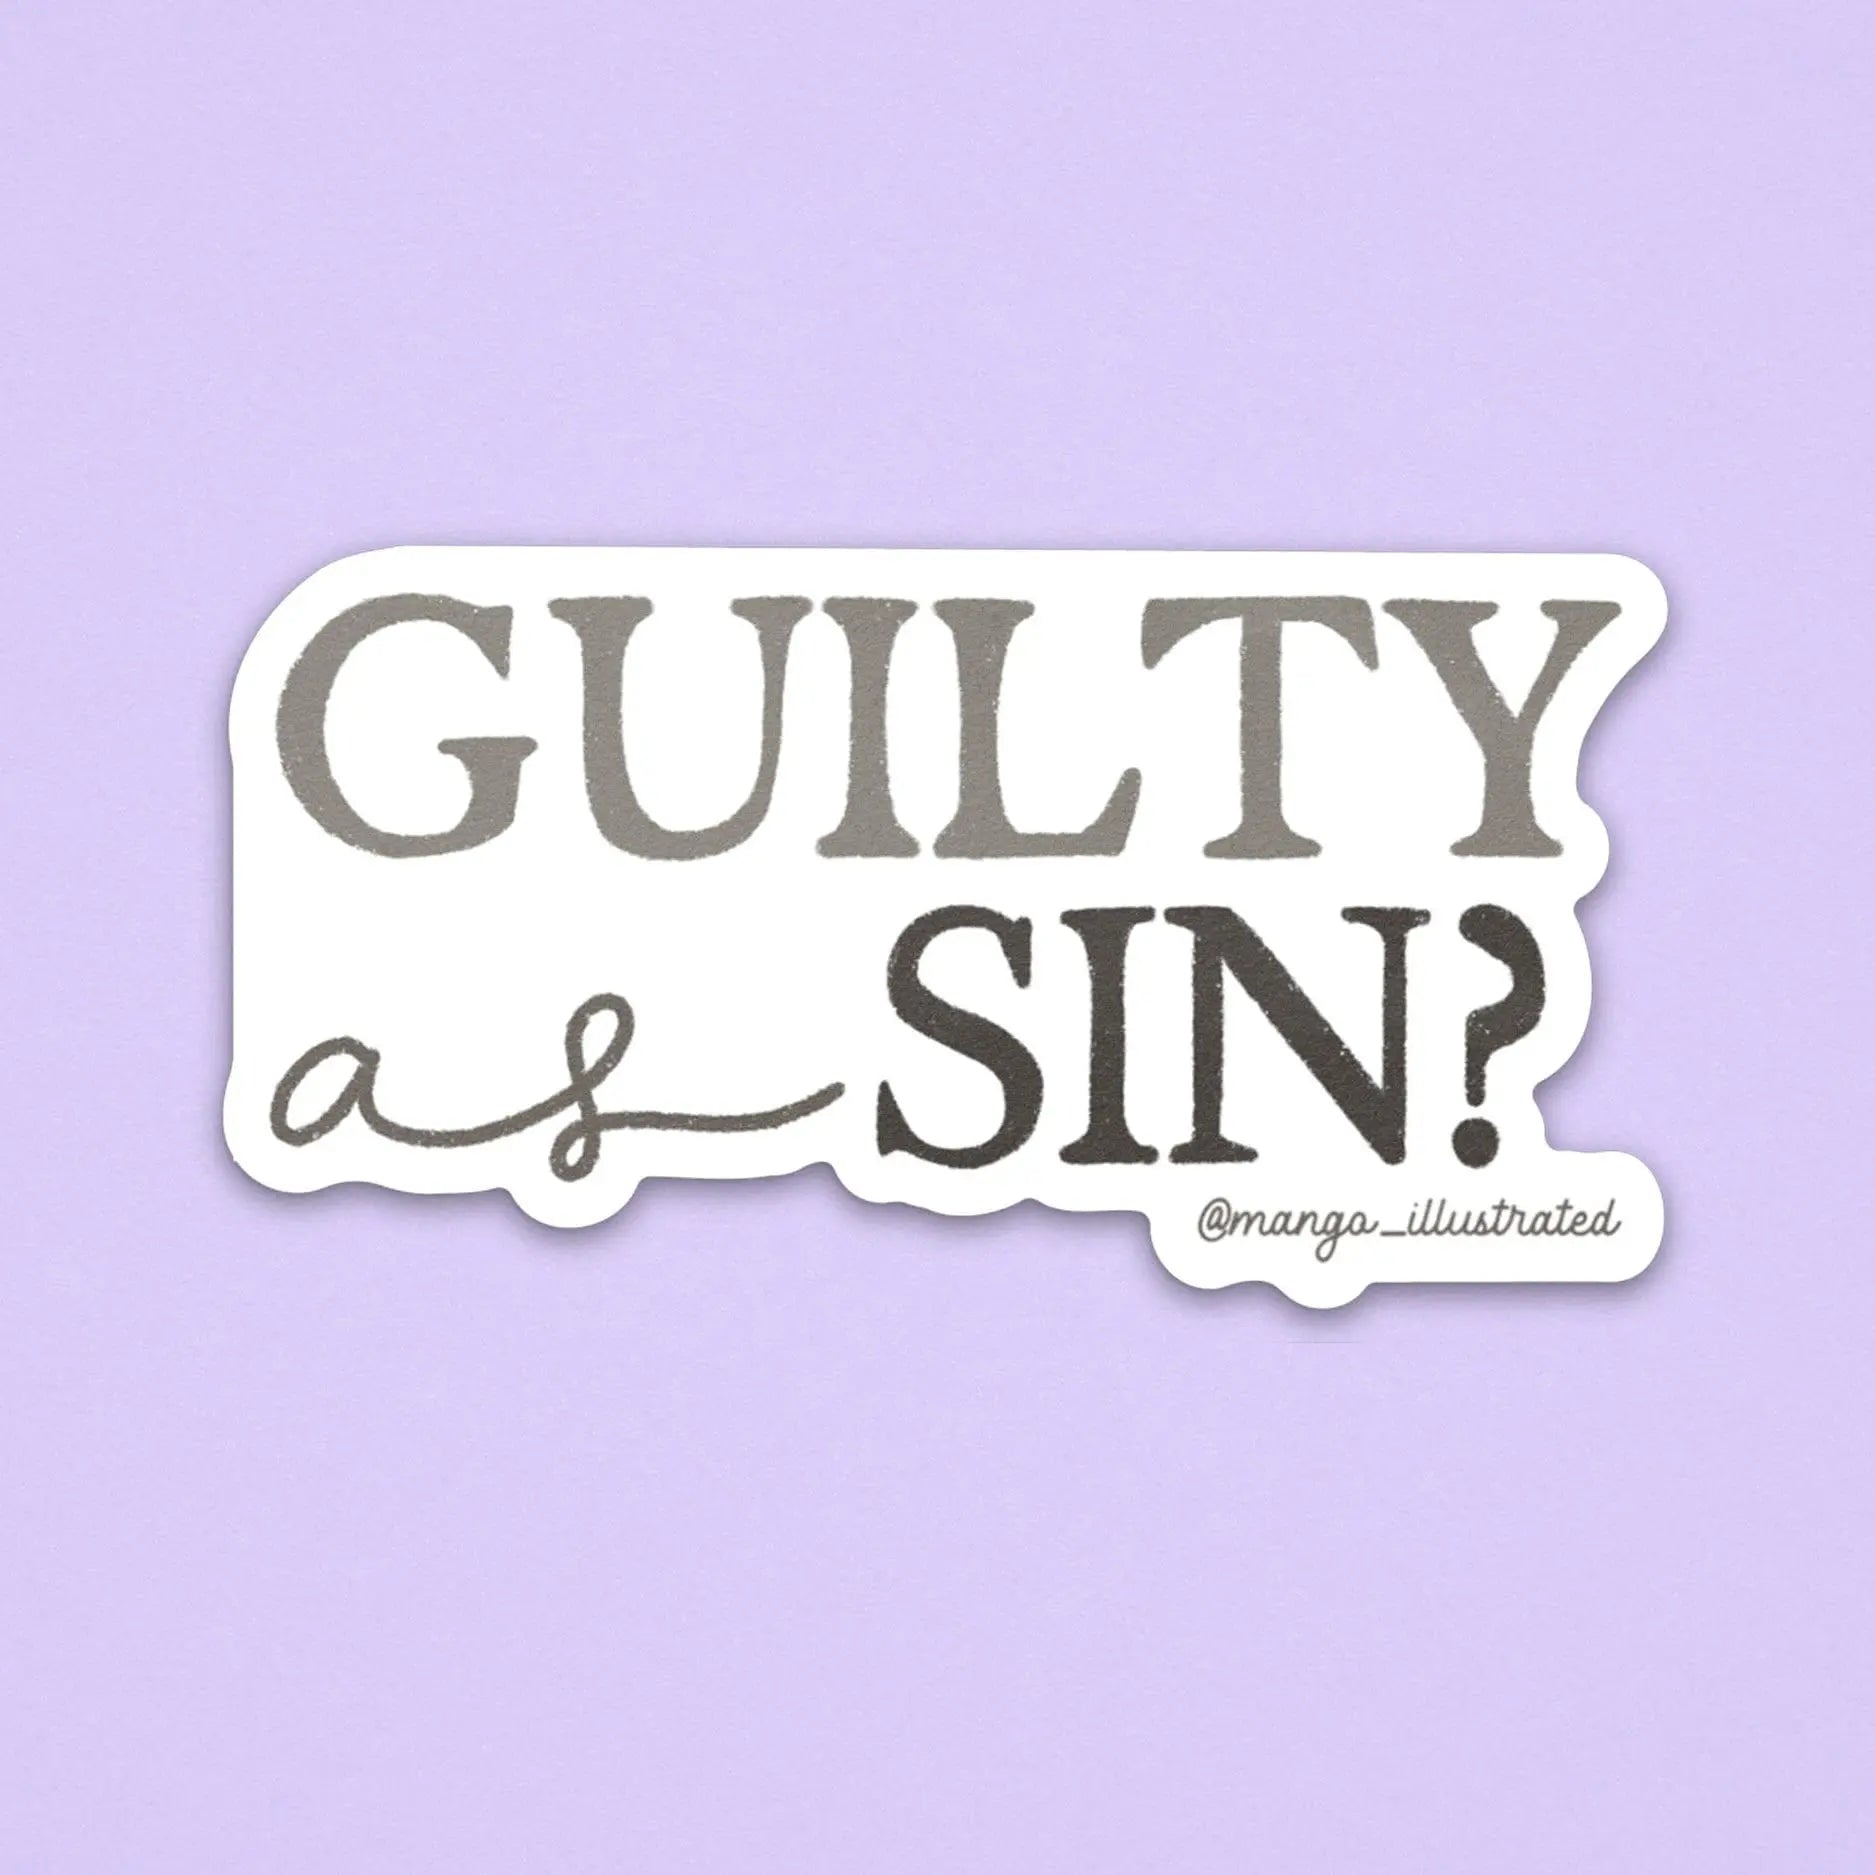 Guilty as sin? sticker MangoIllustrated